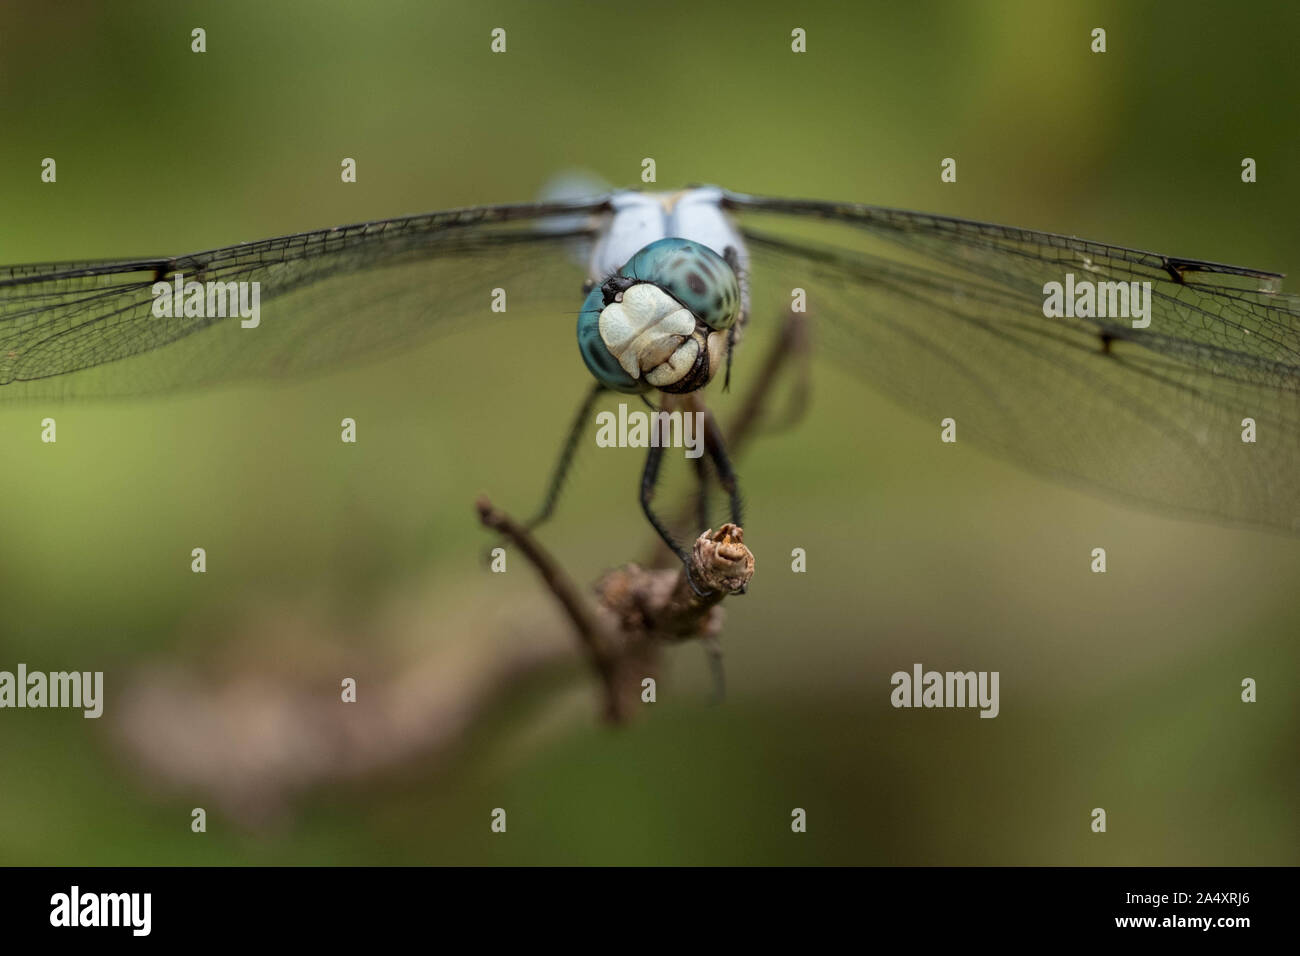 This great blue skimmer tilts its head as it eyes tiny insects flying by. But the position of the mouth and jaws makes it appear to be laughing. Stock Photo